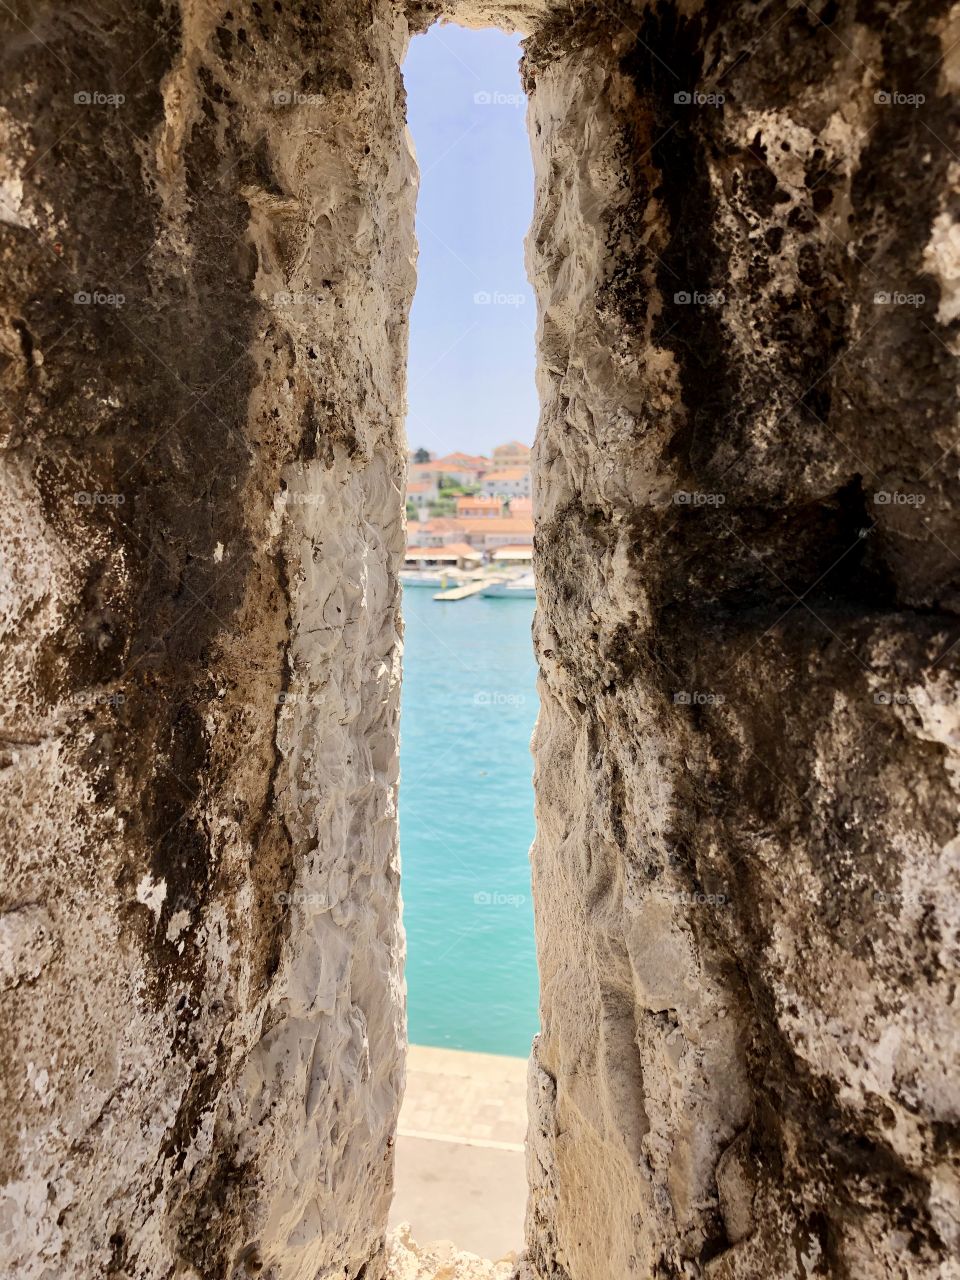 The petit town of Trogir, Croatia through an arrow slit in one of the castles bordering the blue Adriatic Sea